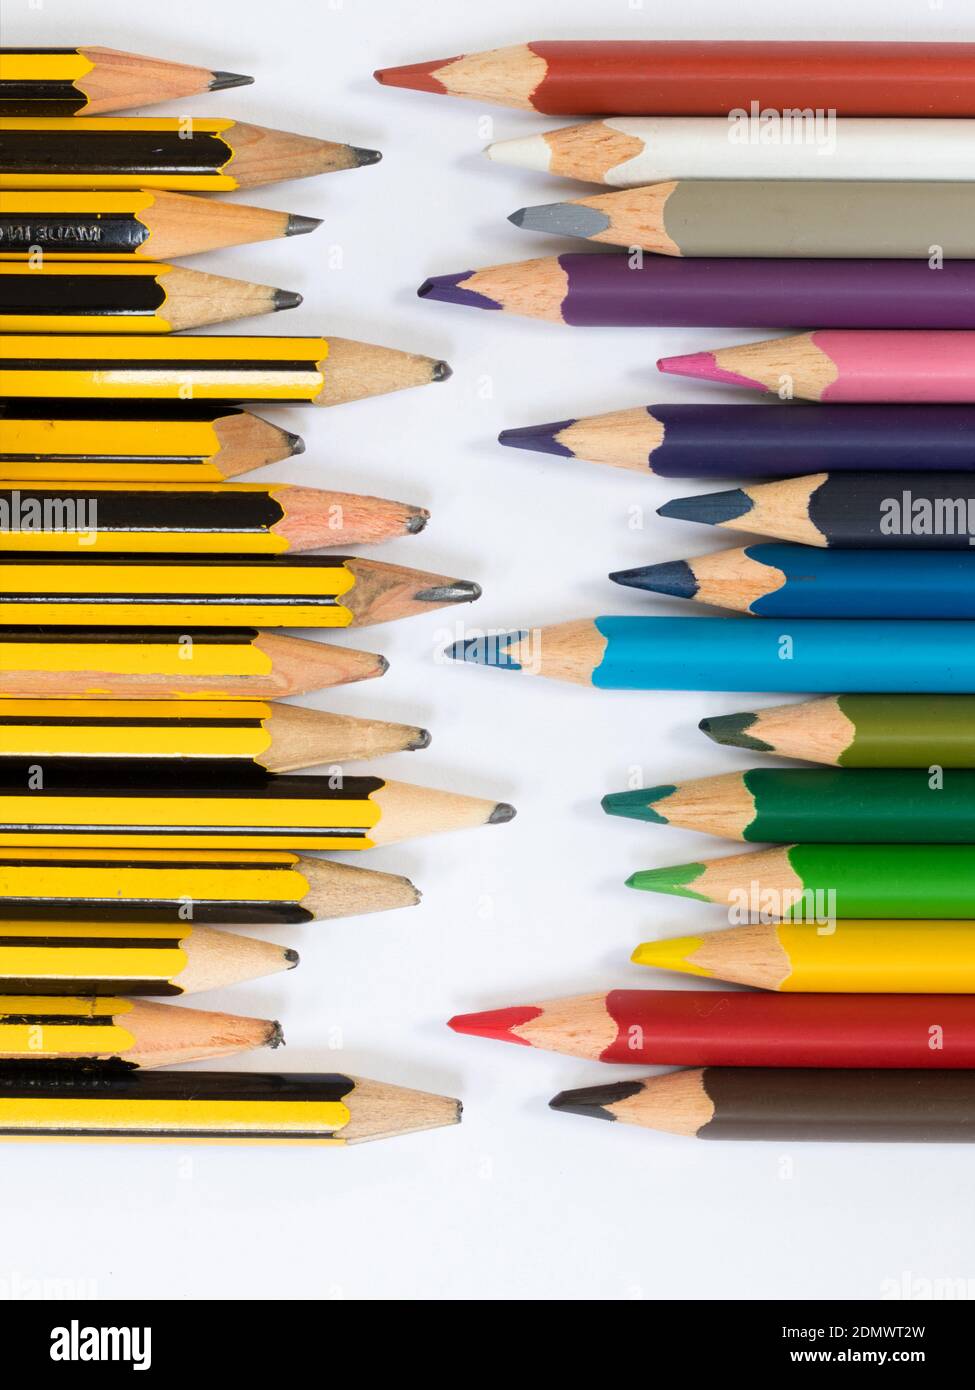 Pencils pointing towards coloured pencils Stock Photo